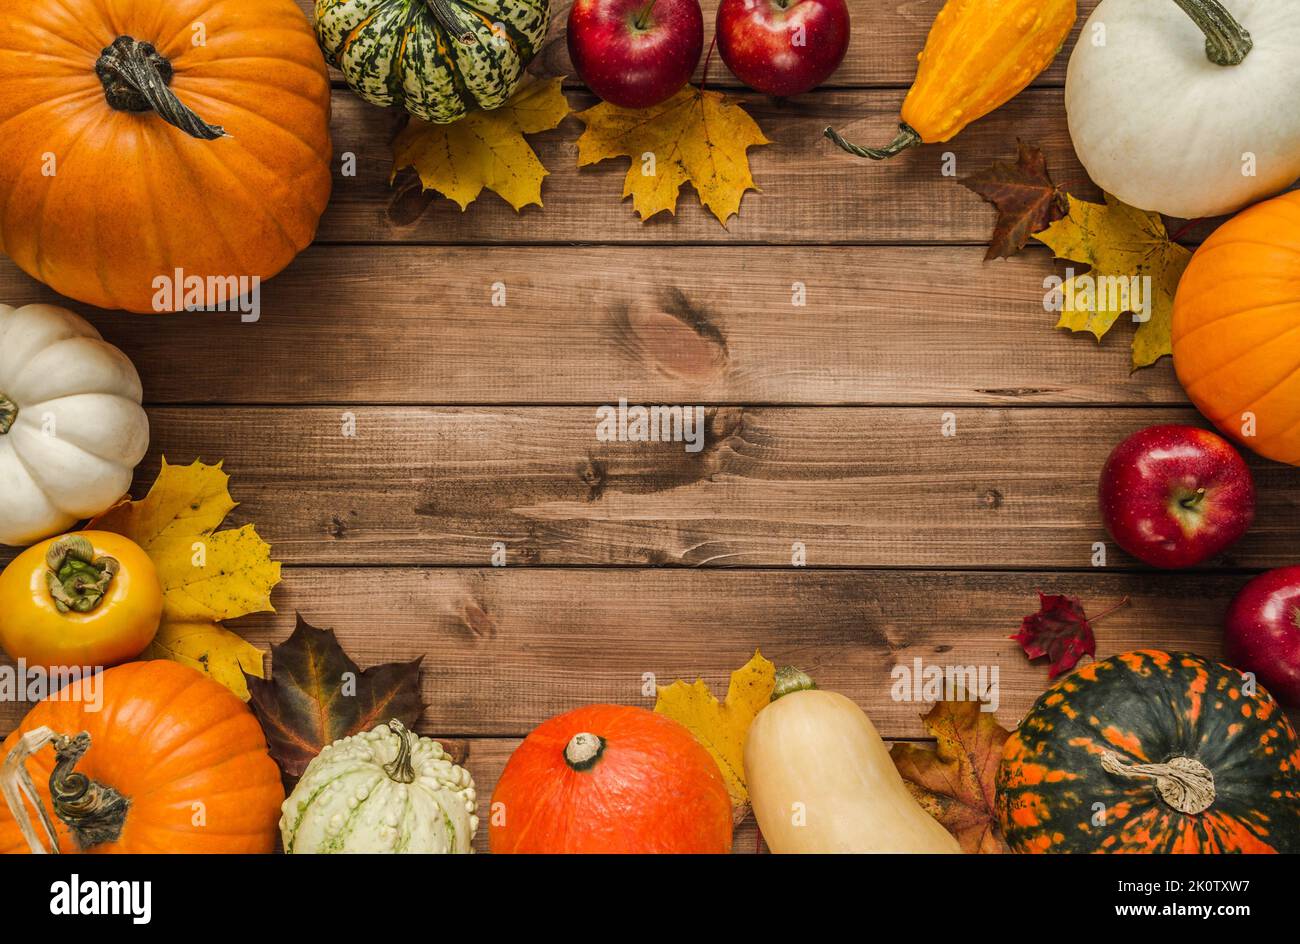 Autumn composition frame with variety of pumpkins, gourds, squash types, apples, kaki persimmon fruit, leaves. Fall flat lay, copy space on wood. Stock Photo